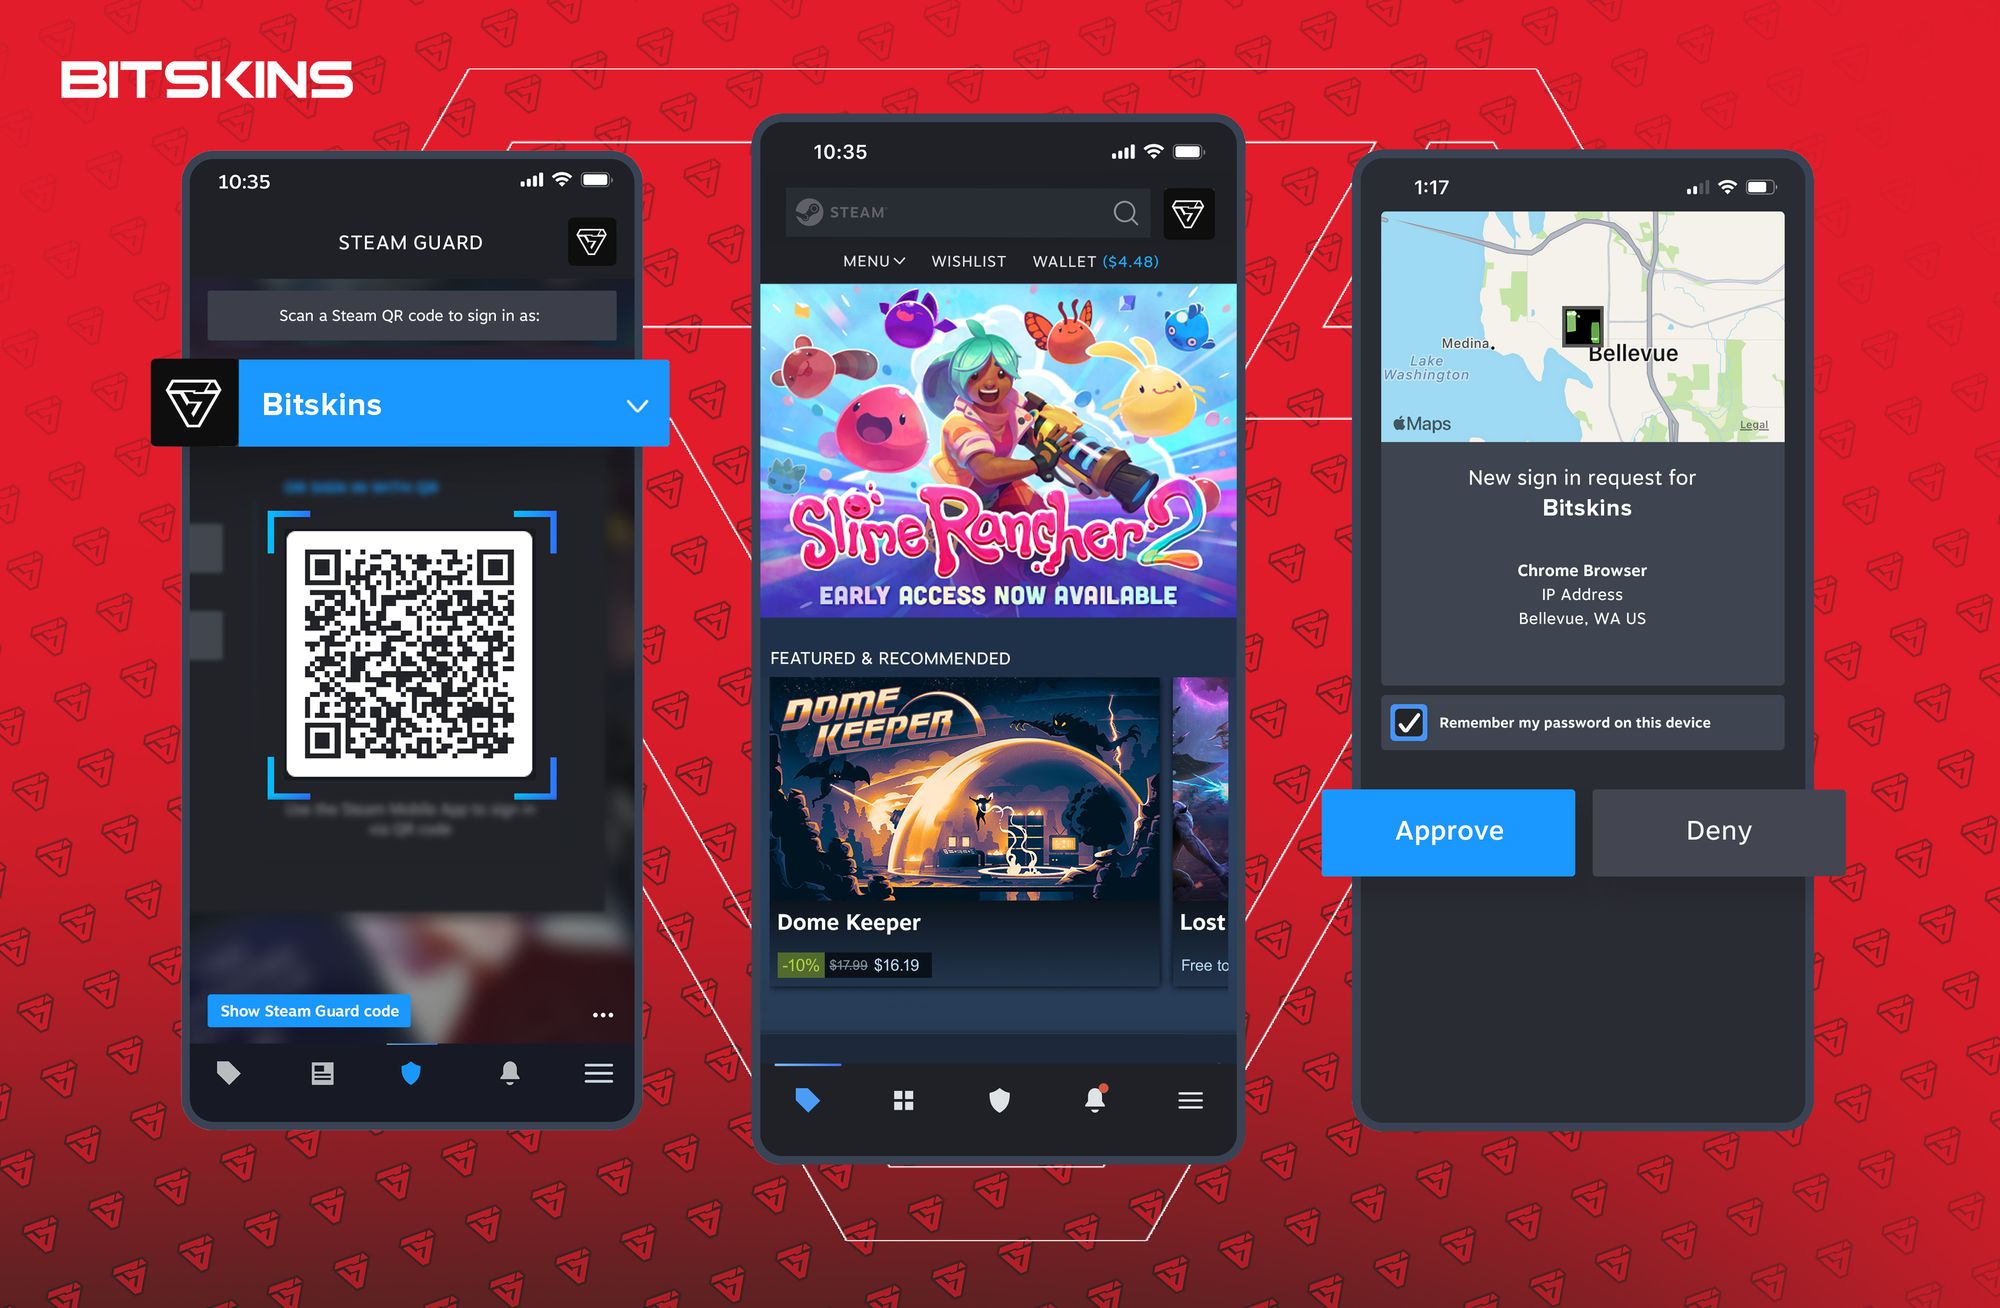 Steam finally has an updated mobile app for iOS and Android